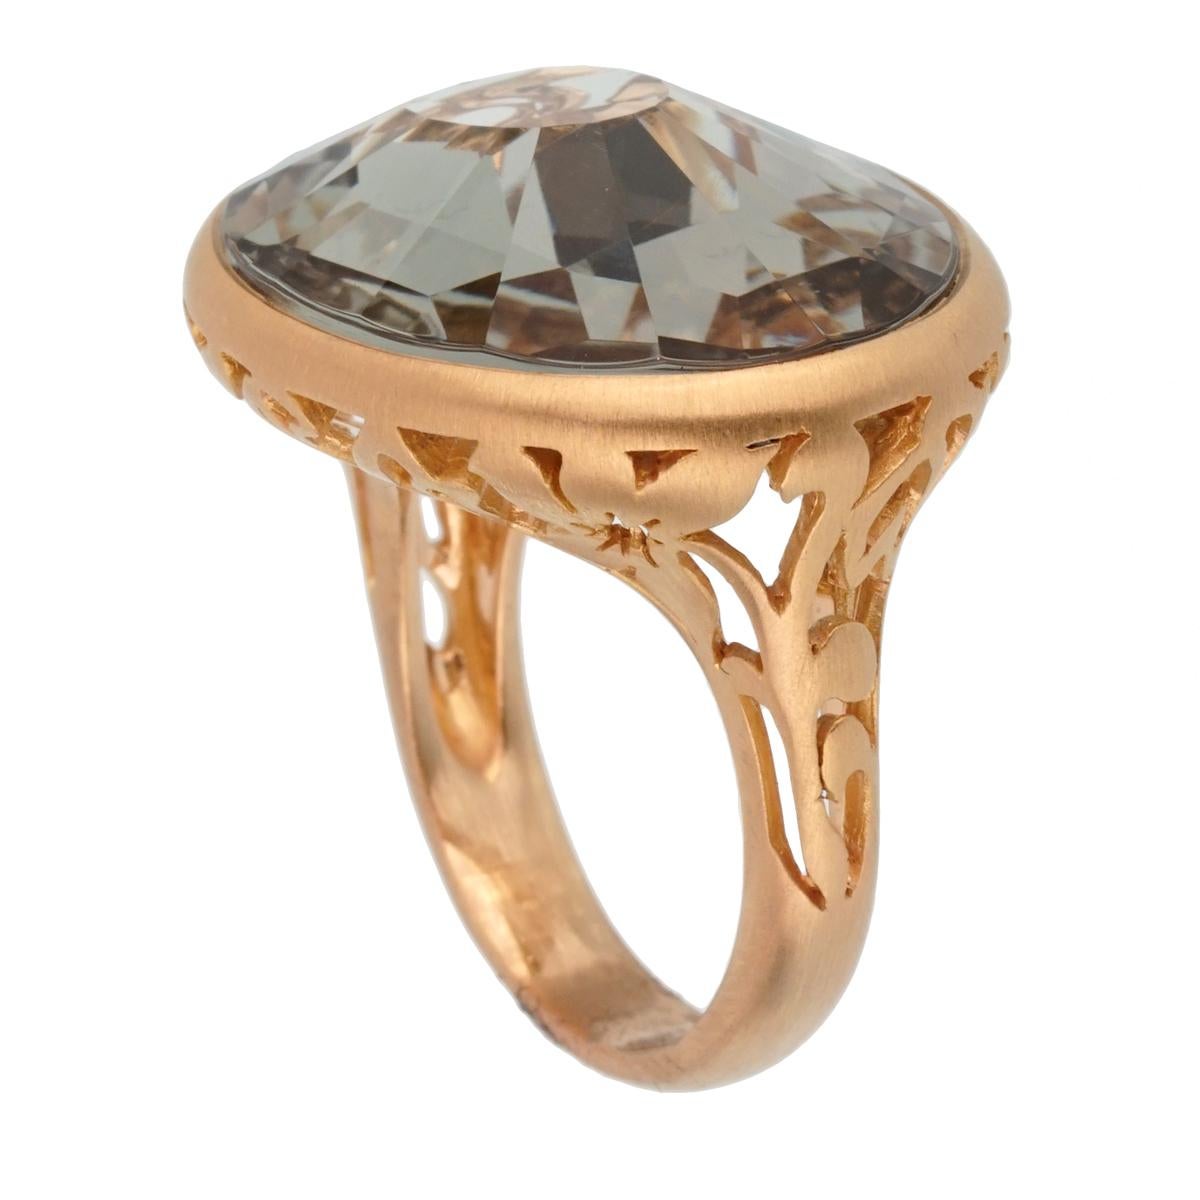 A chic brand new Pomellato cocktail ring showcasing a 10.19ct Green Prasiolite set in 18k rose gold. The ring measures a size 7.5 and can be resized

Pomellato Retail: $5500
Sku: 2443